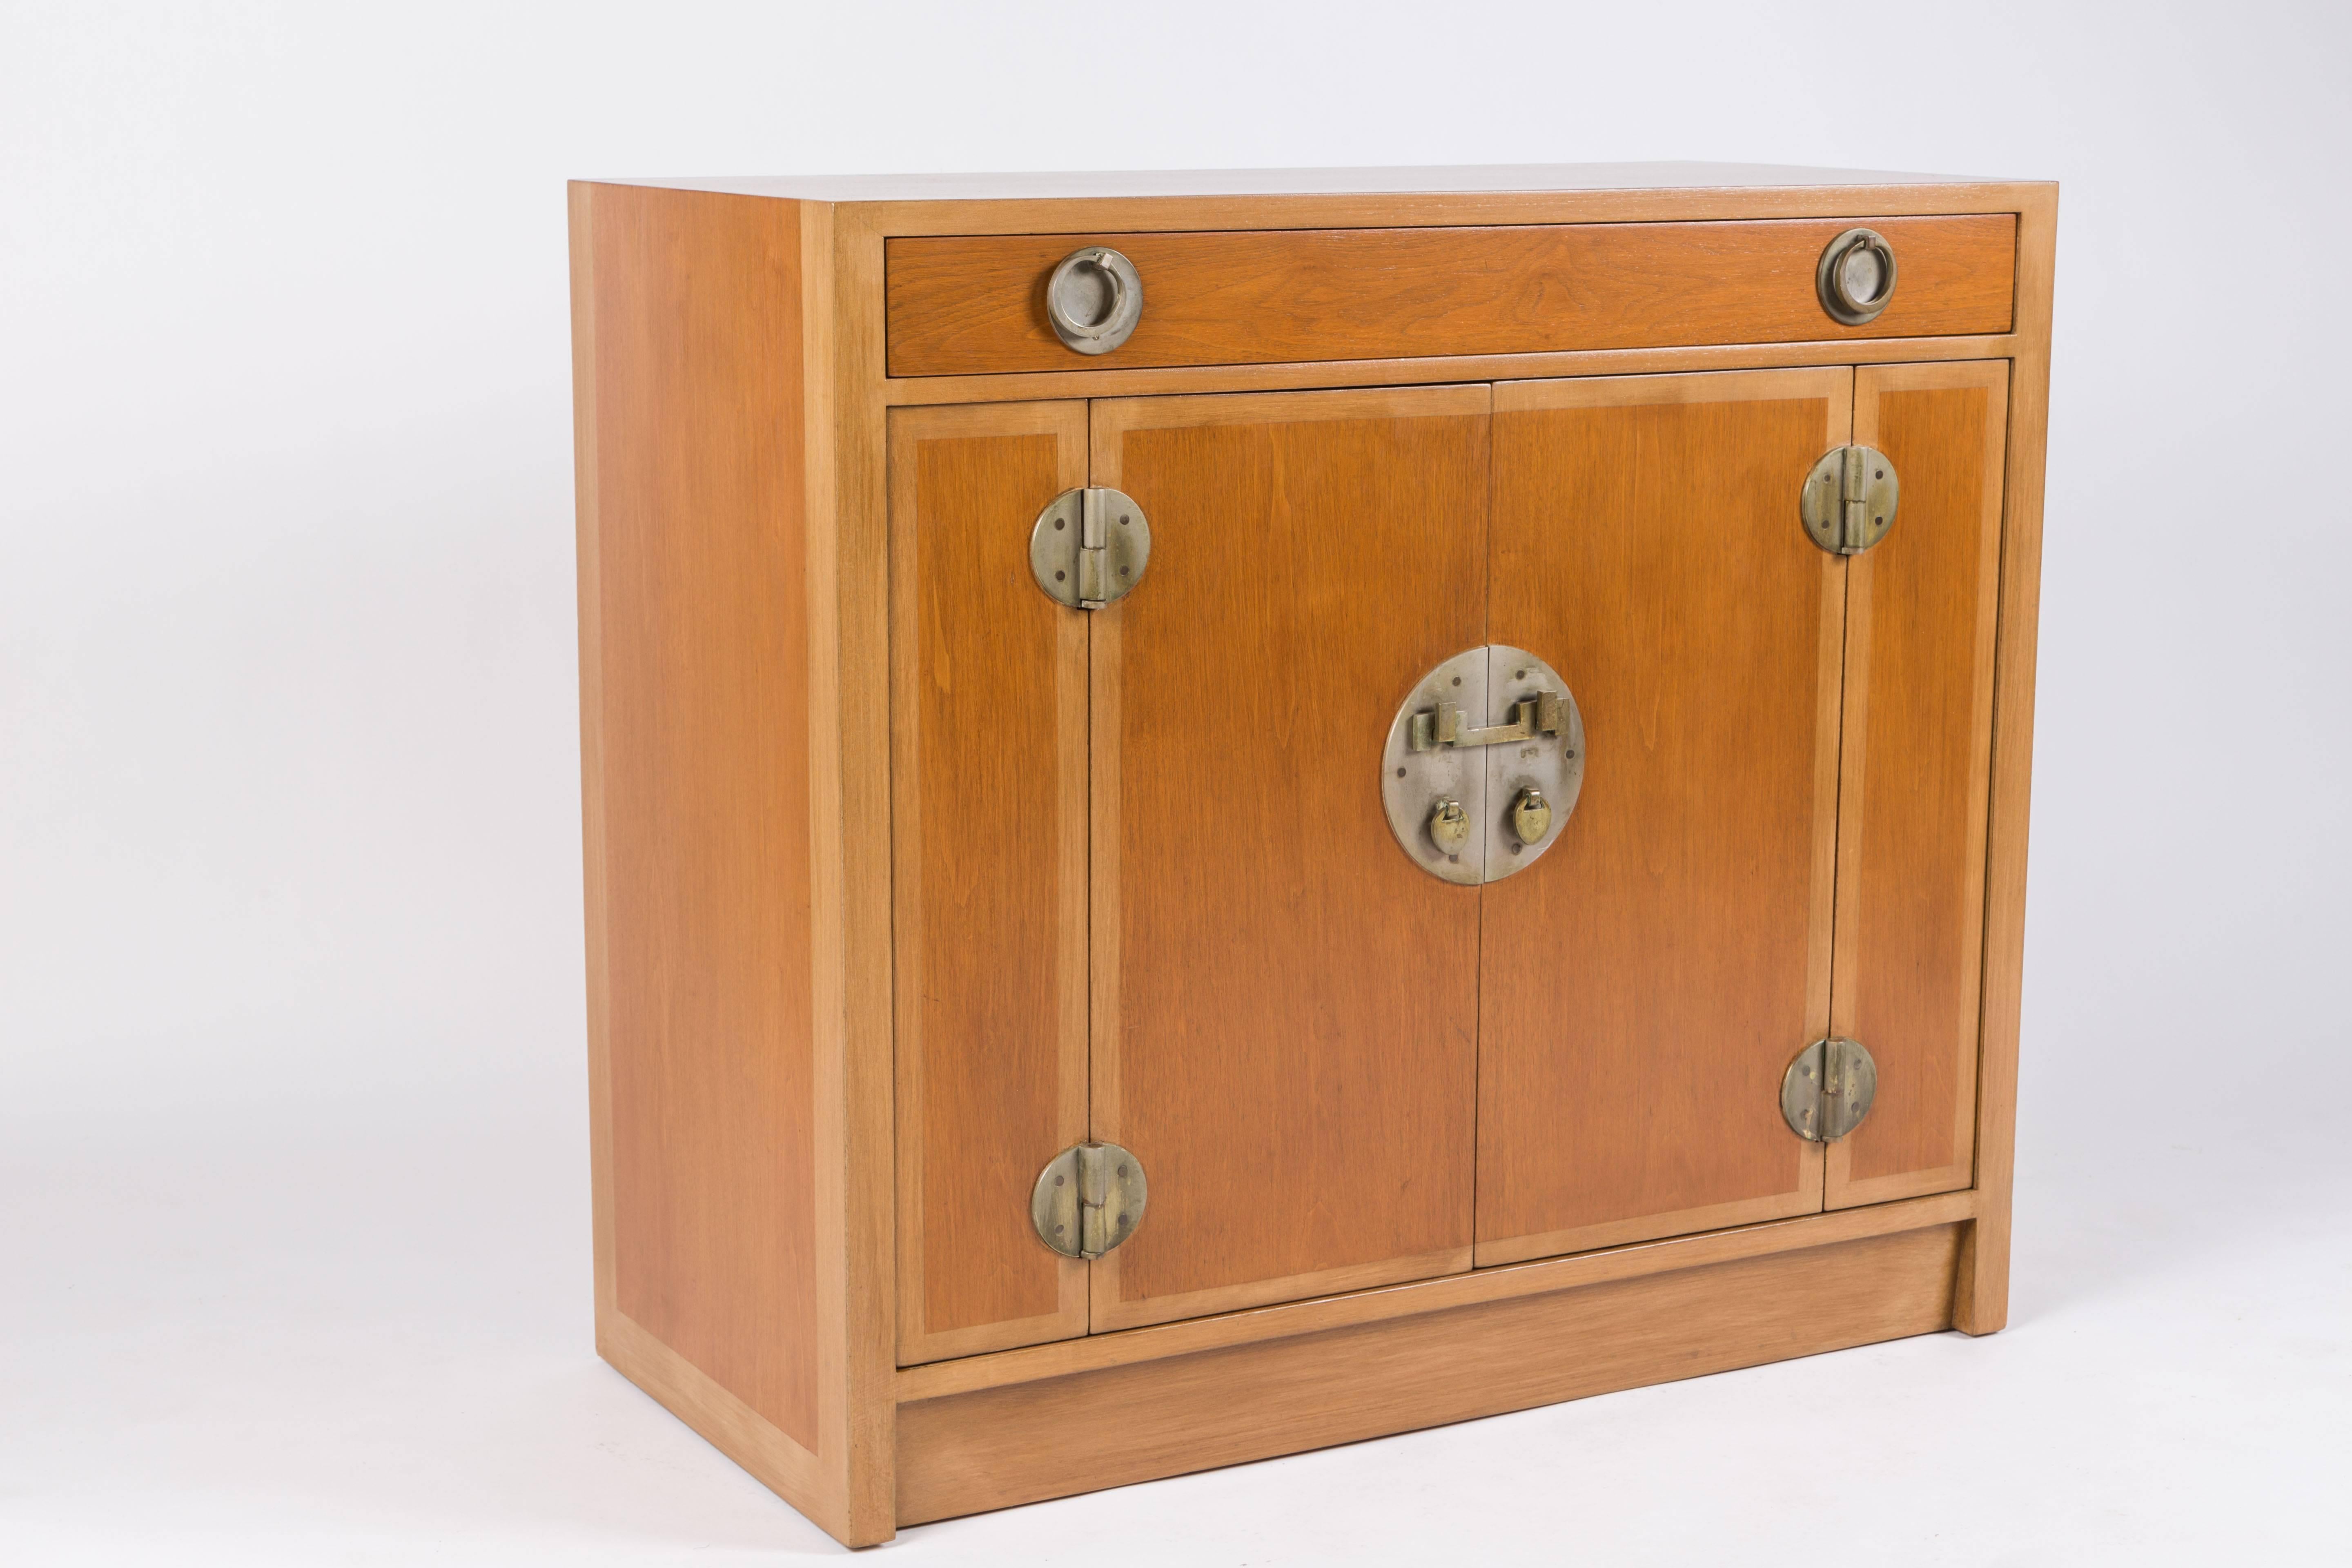 Metal Chinoiserie Inspired Cabinet Designed by Edward Wormley for Dunbar